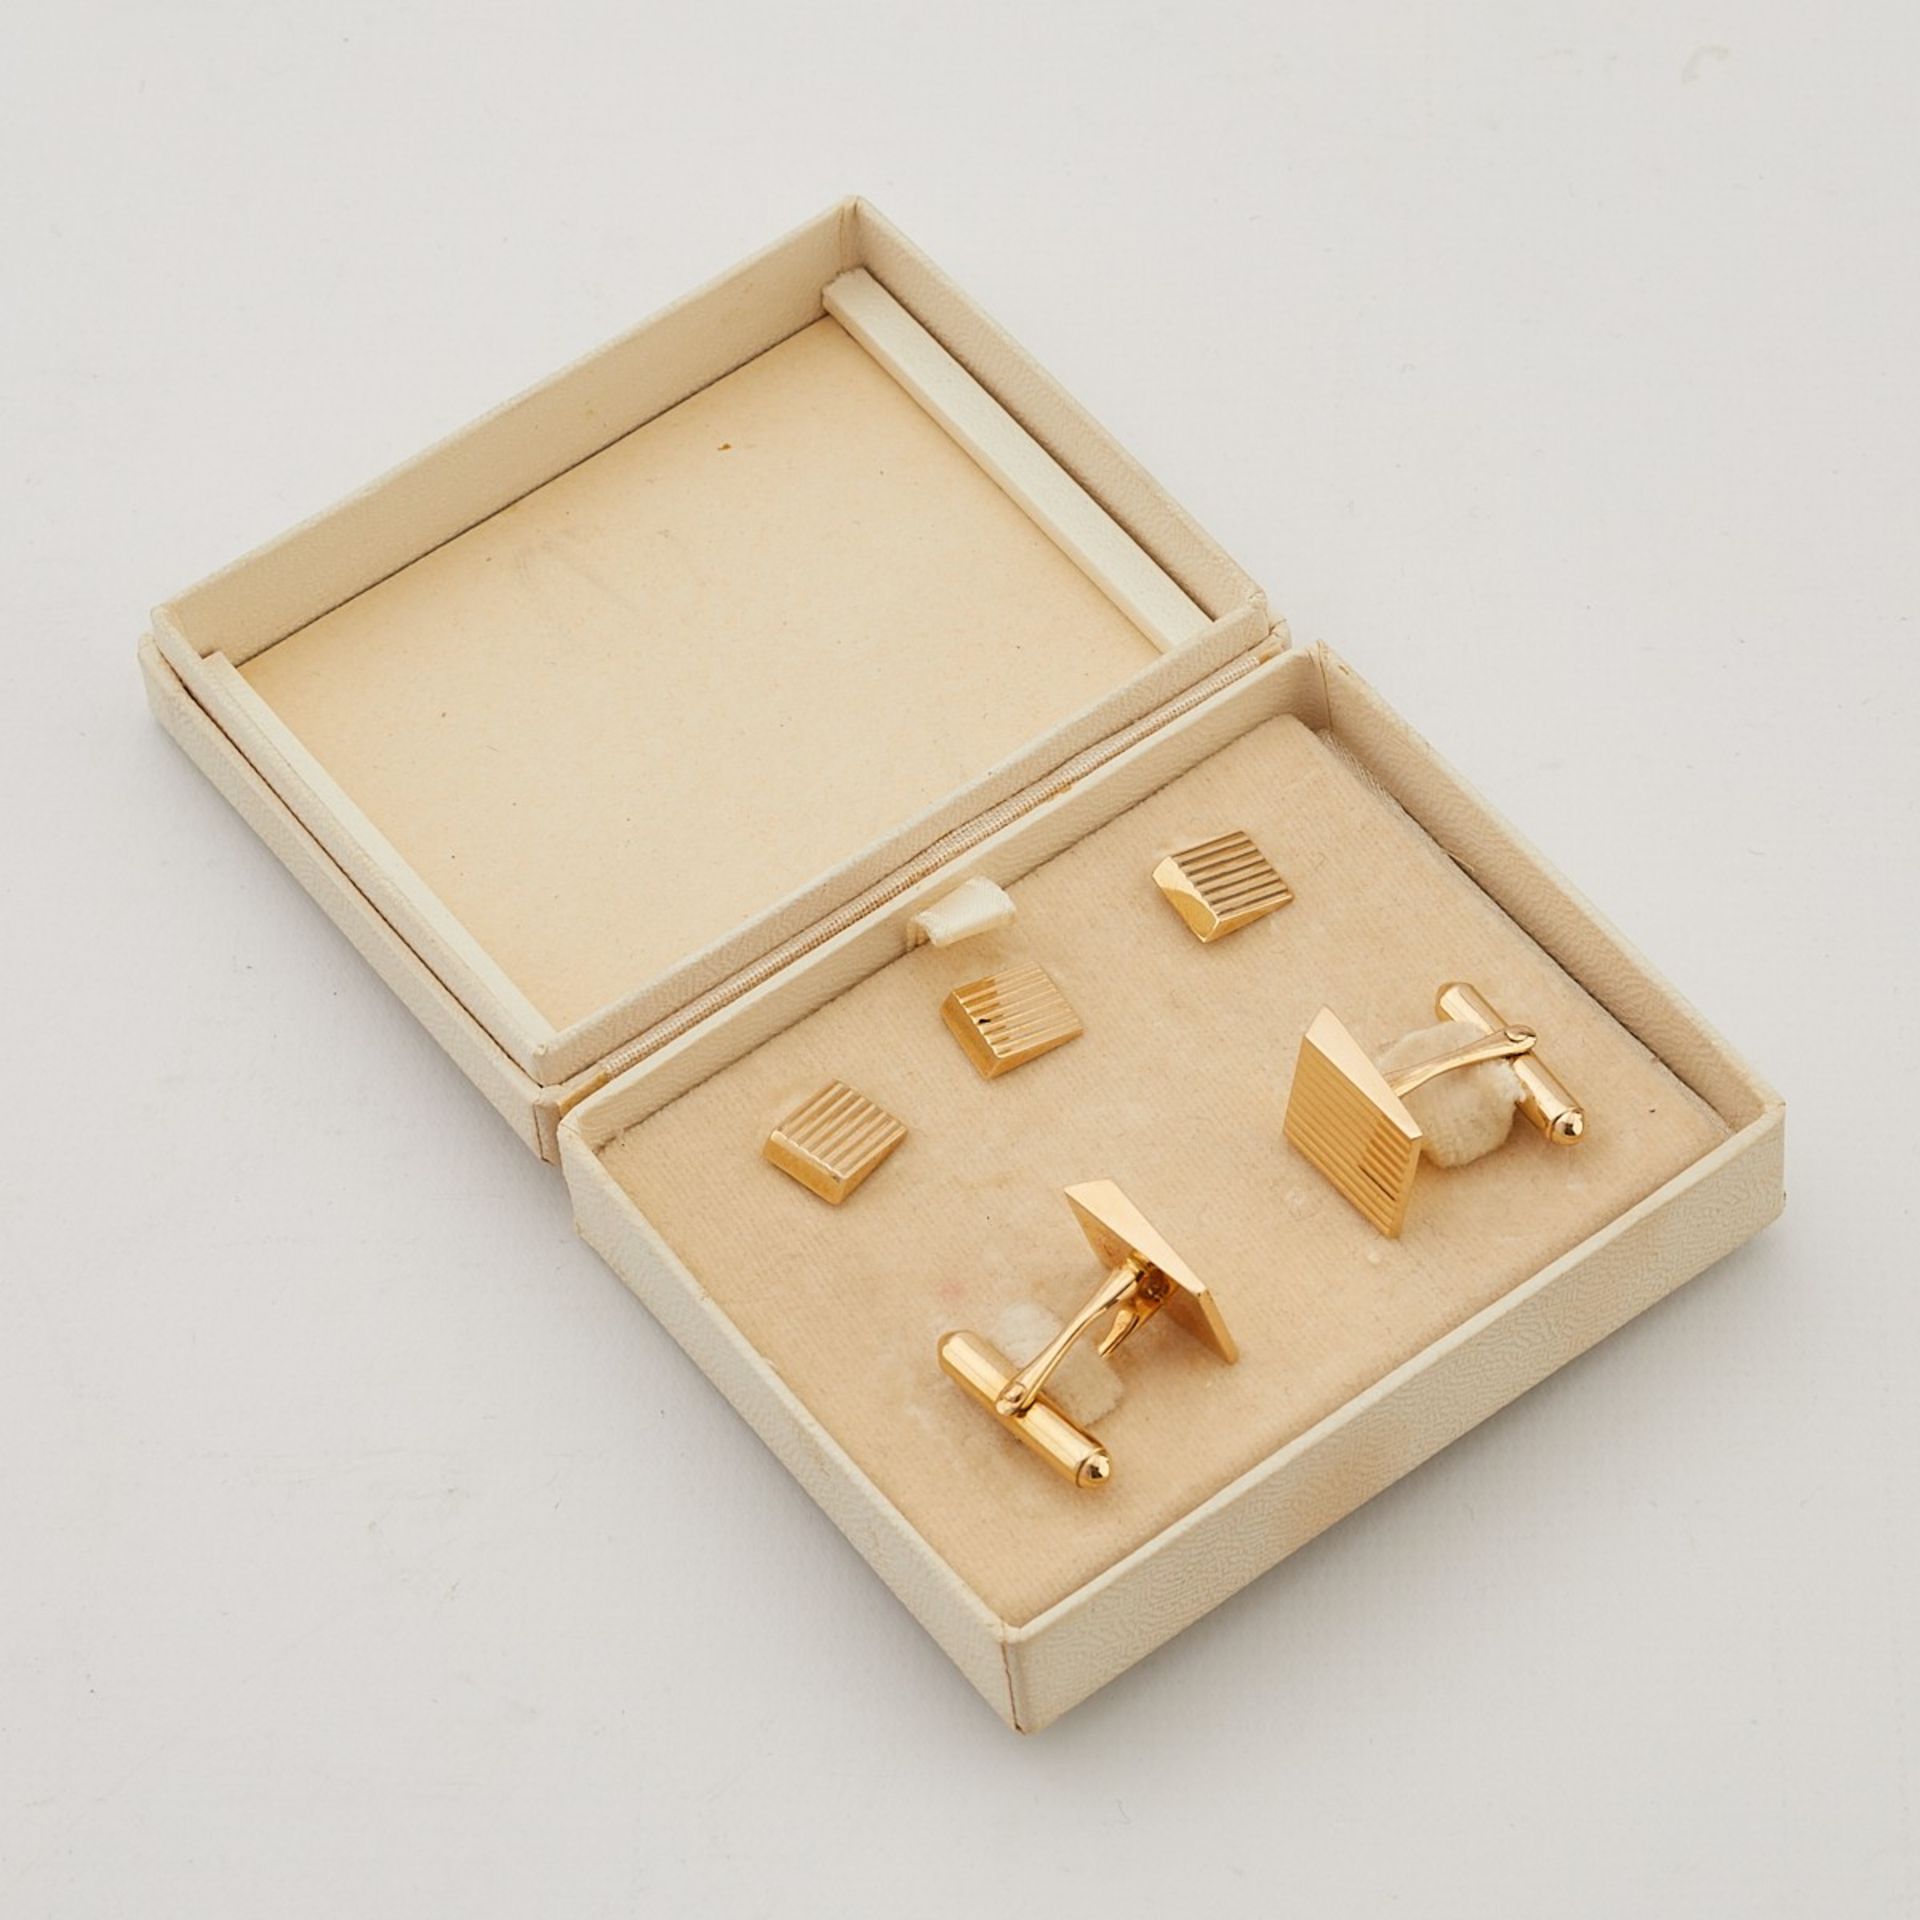 5 14K Yellow Gold Grooved Modernist Cufflinks - Image 8 of 8